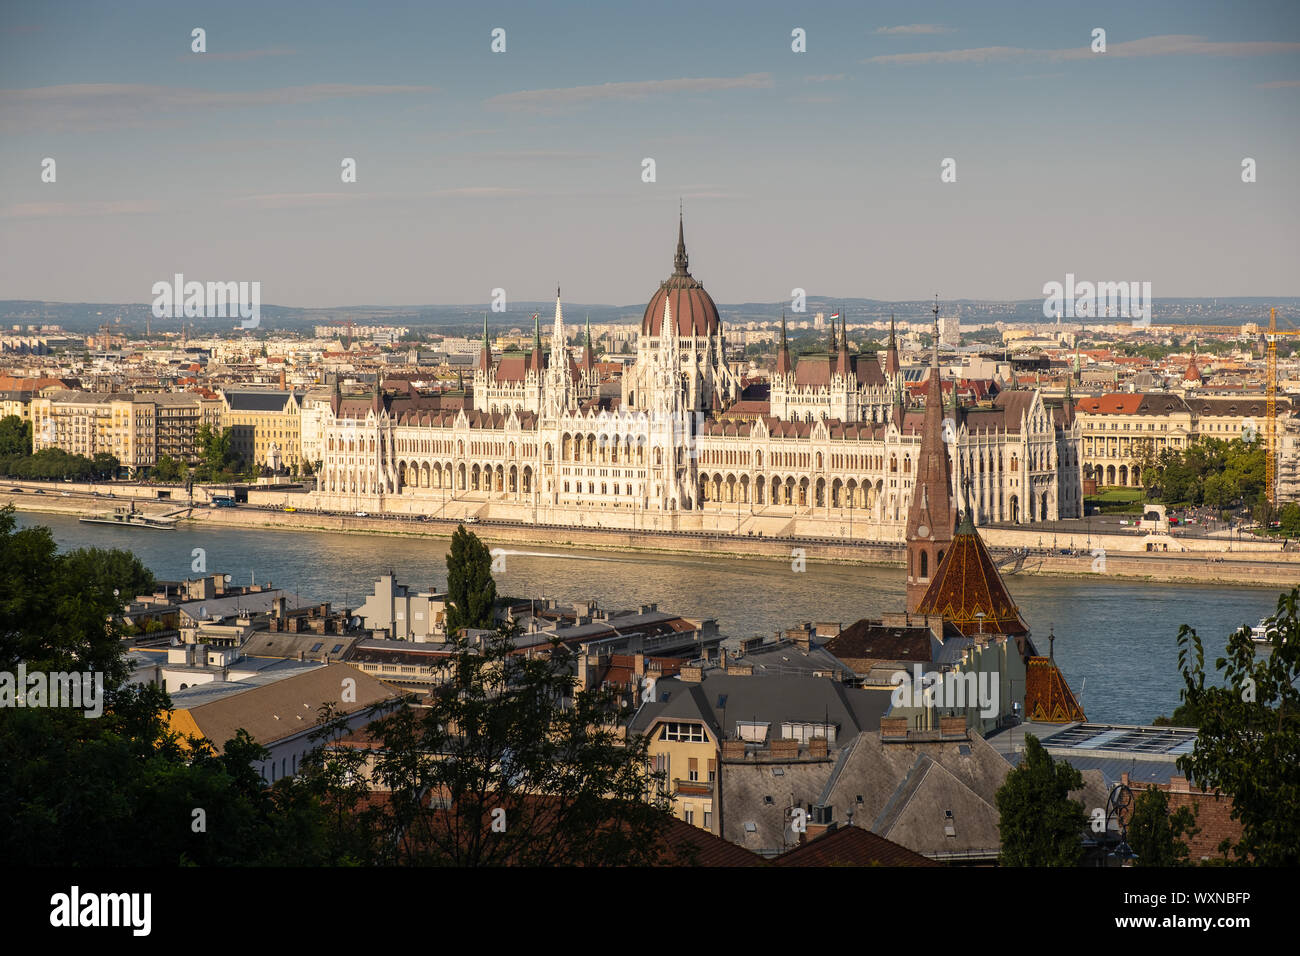 BUDAPEST, HUNGARY - AUGUST 19, 2019: Hungarian Parliament Building - day view from the Castle Hill Stock Photo